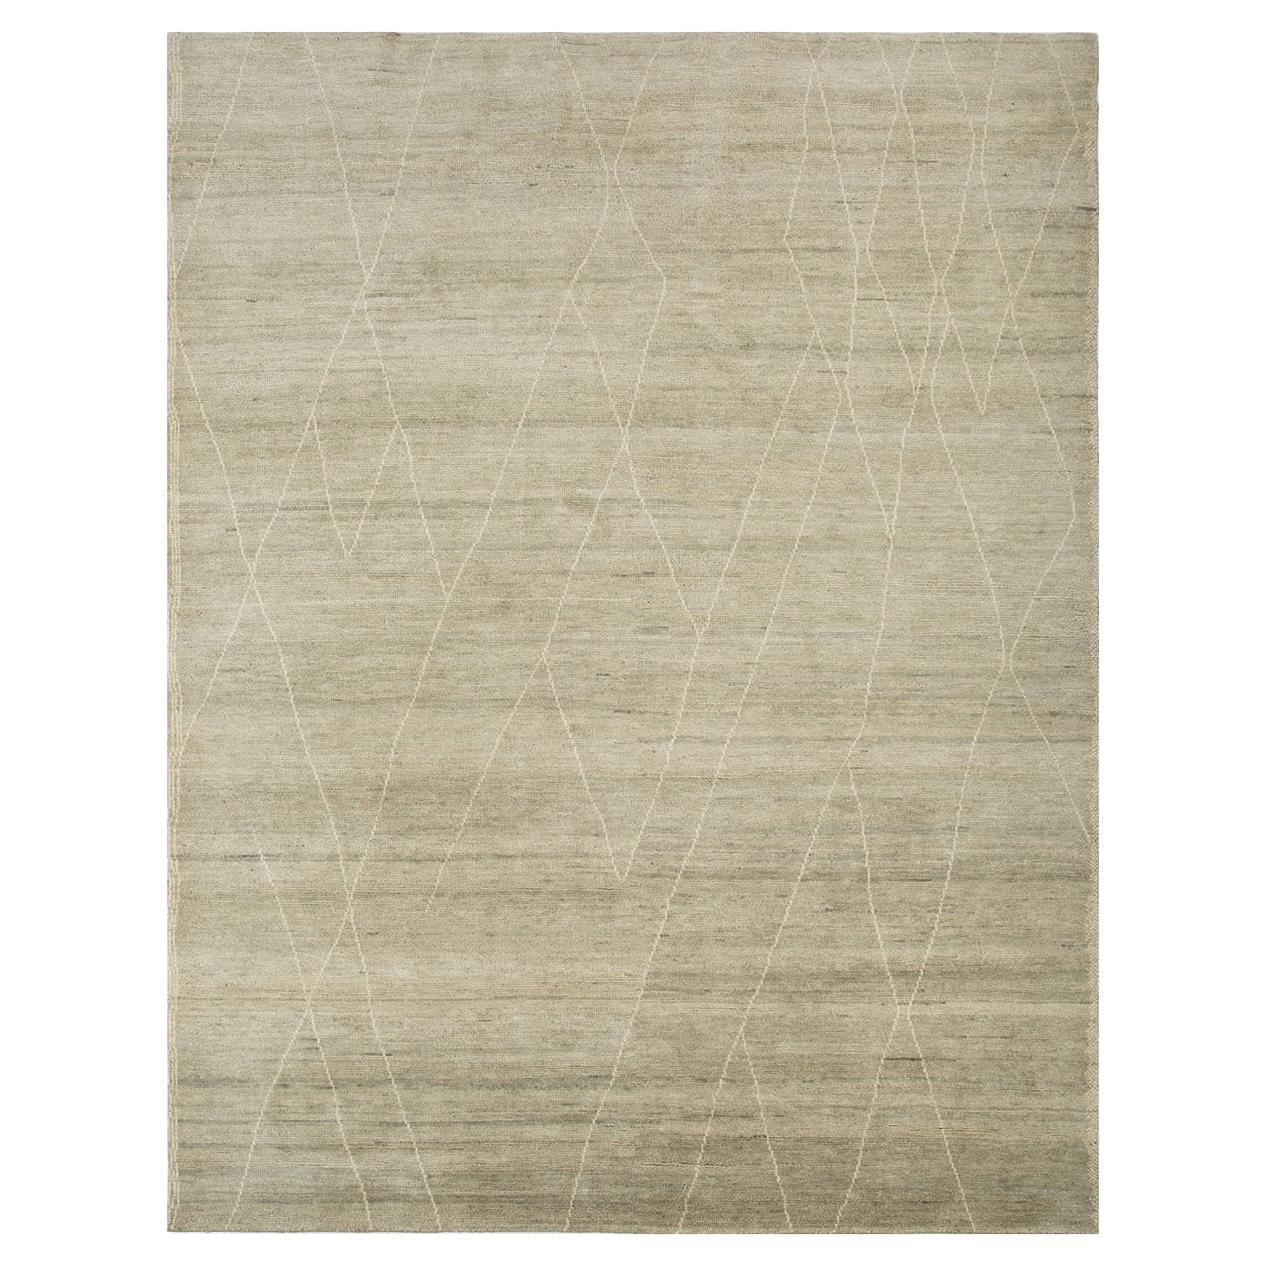 Taup Rug by Rural Weavers, Knotted, Wool, 240x300cm